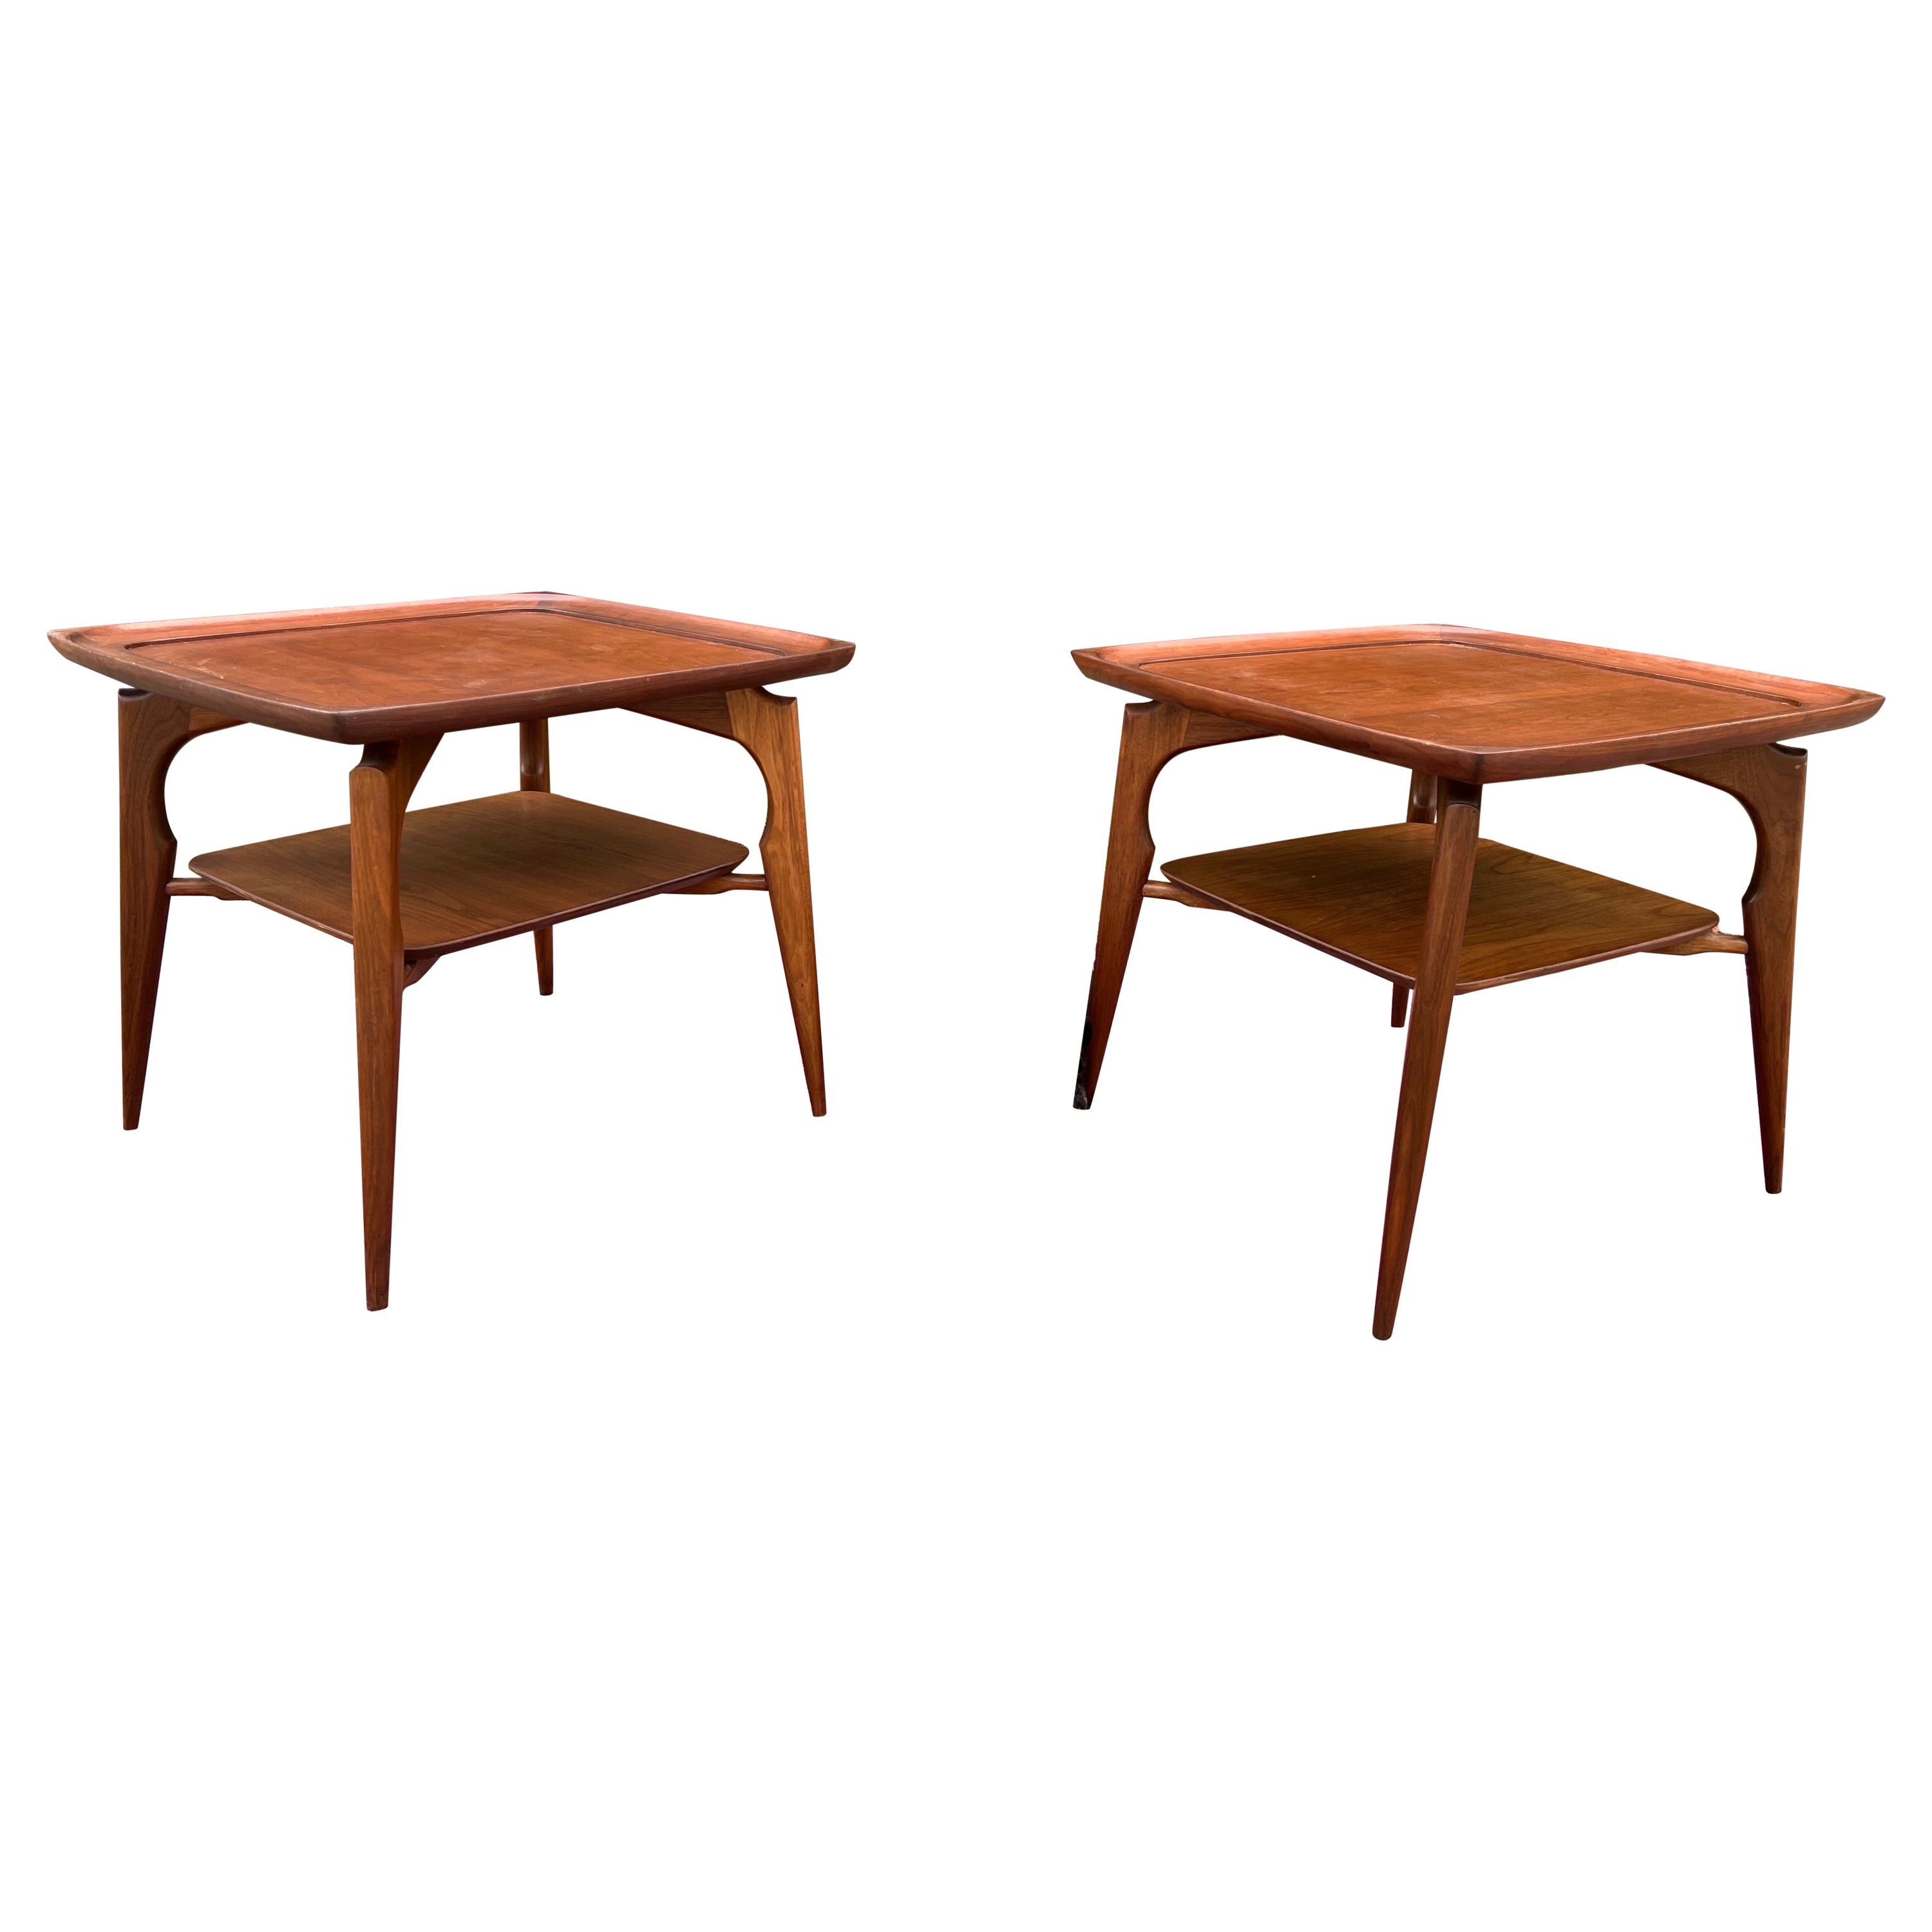 20th Century Danish Modern Walnut Sculptural Square End Tables - a Pair For Sale